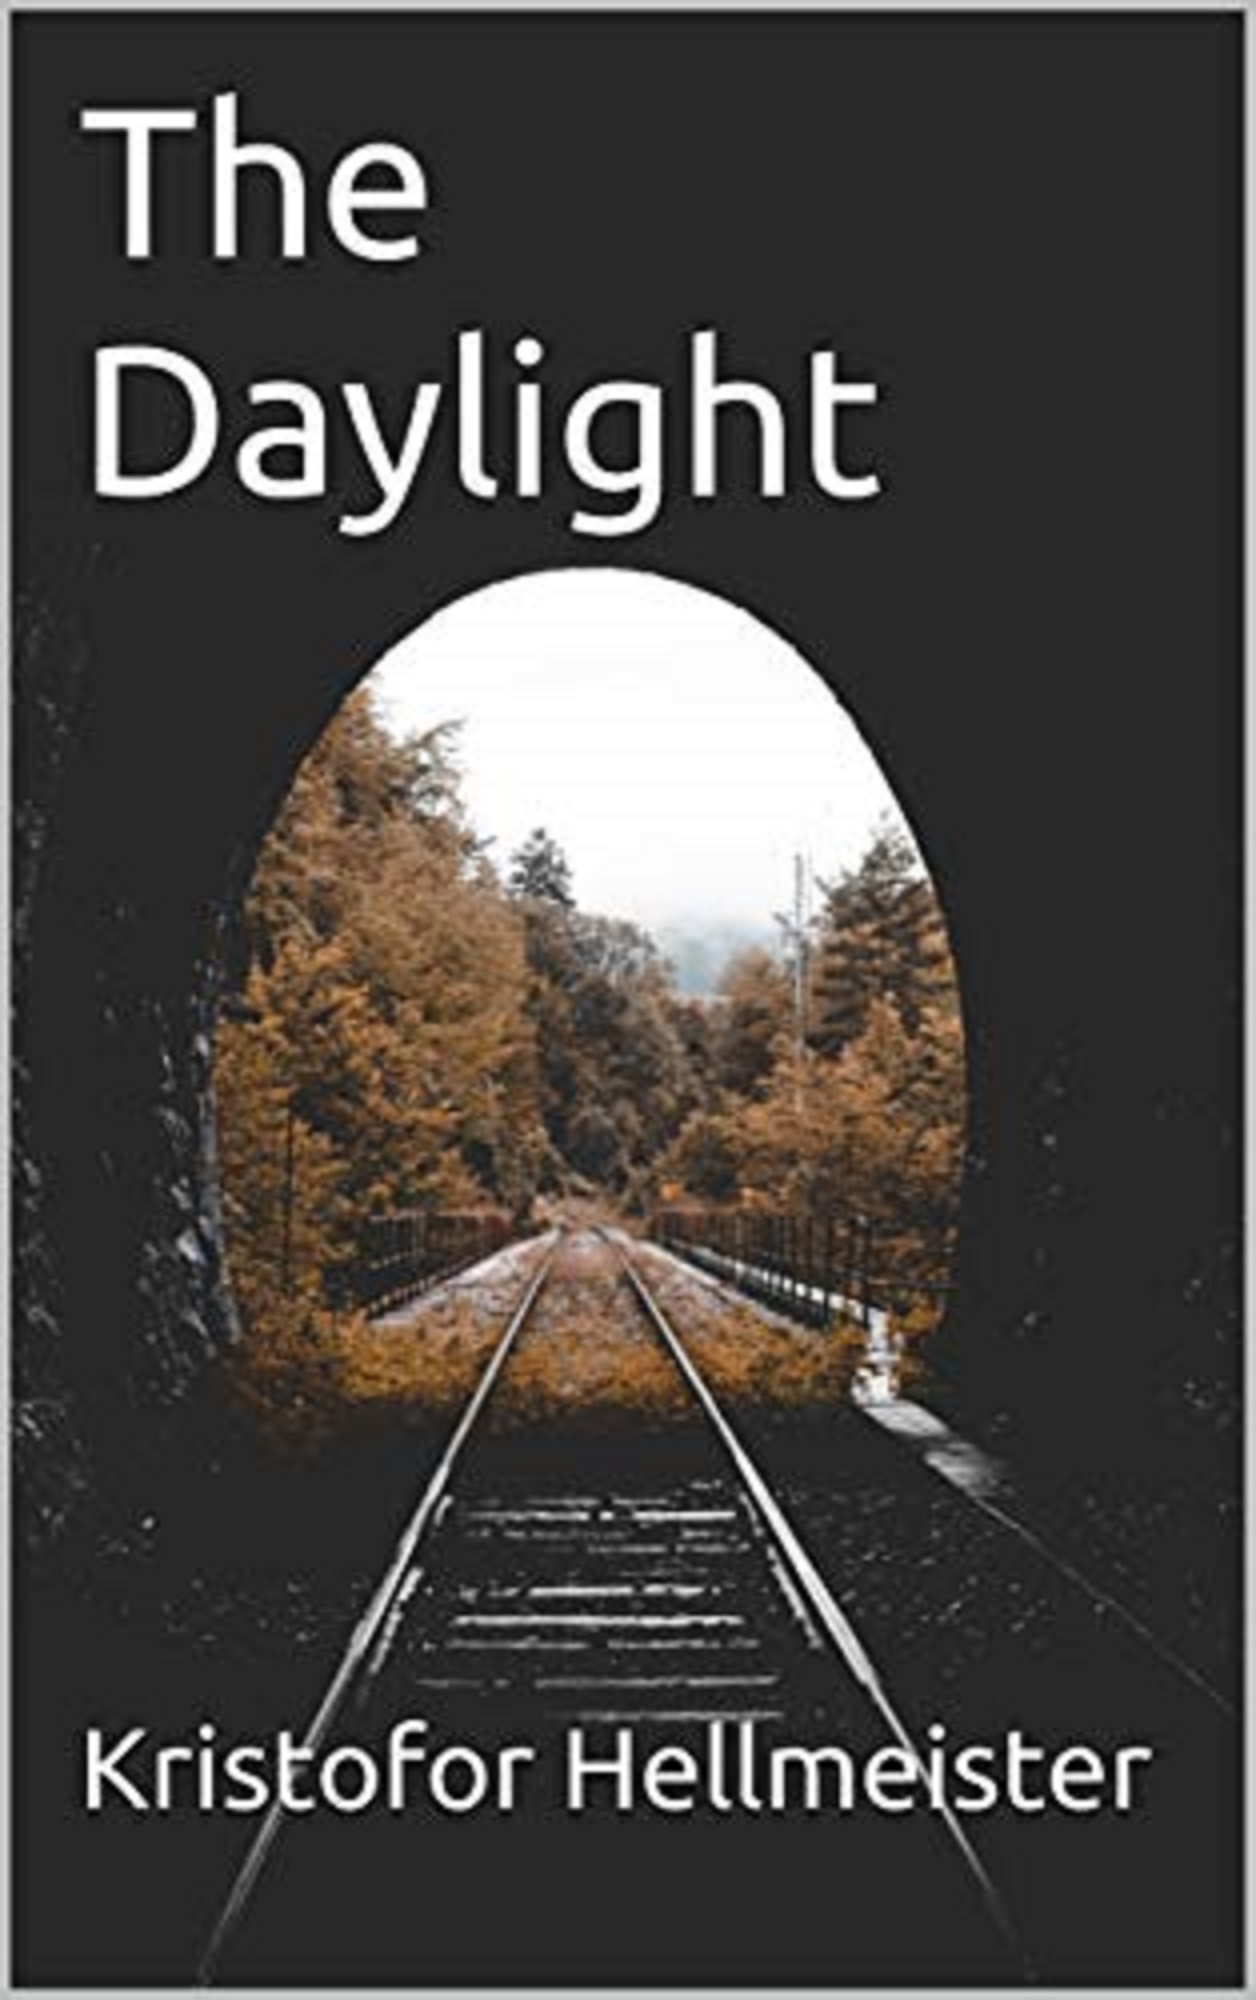 FREE: The Daylight by Kristofor Hellmeister